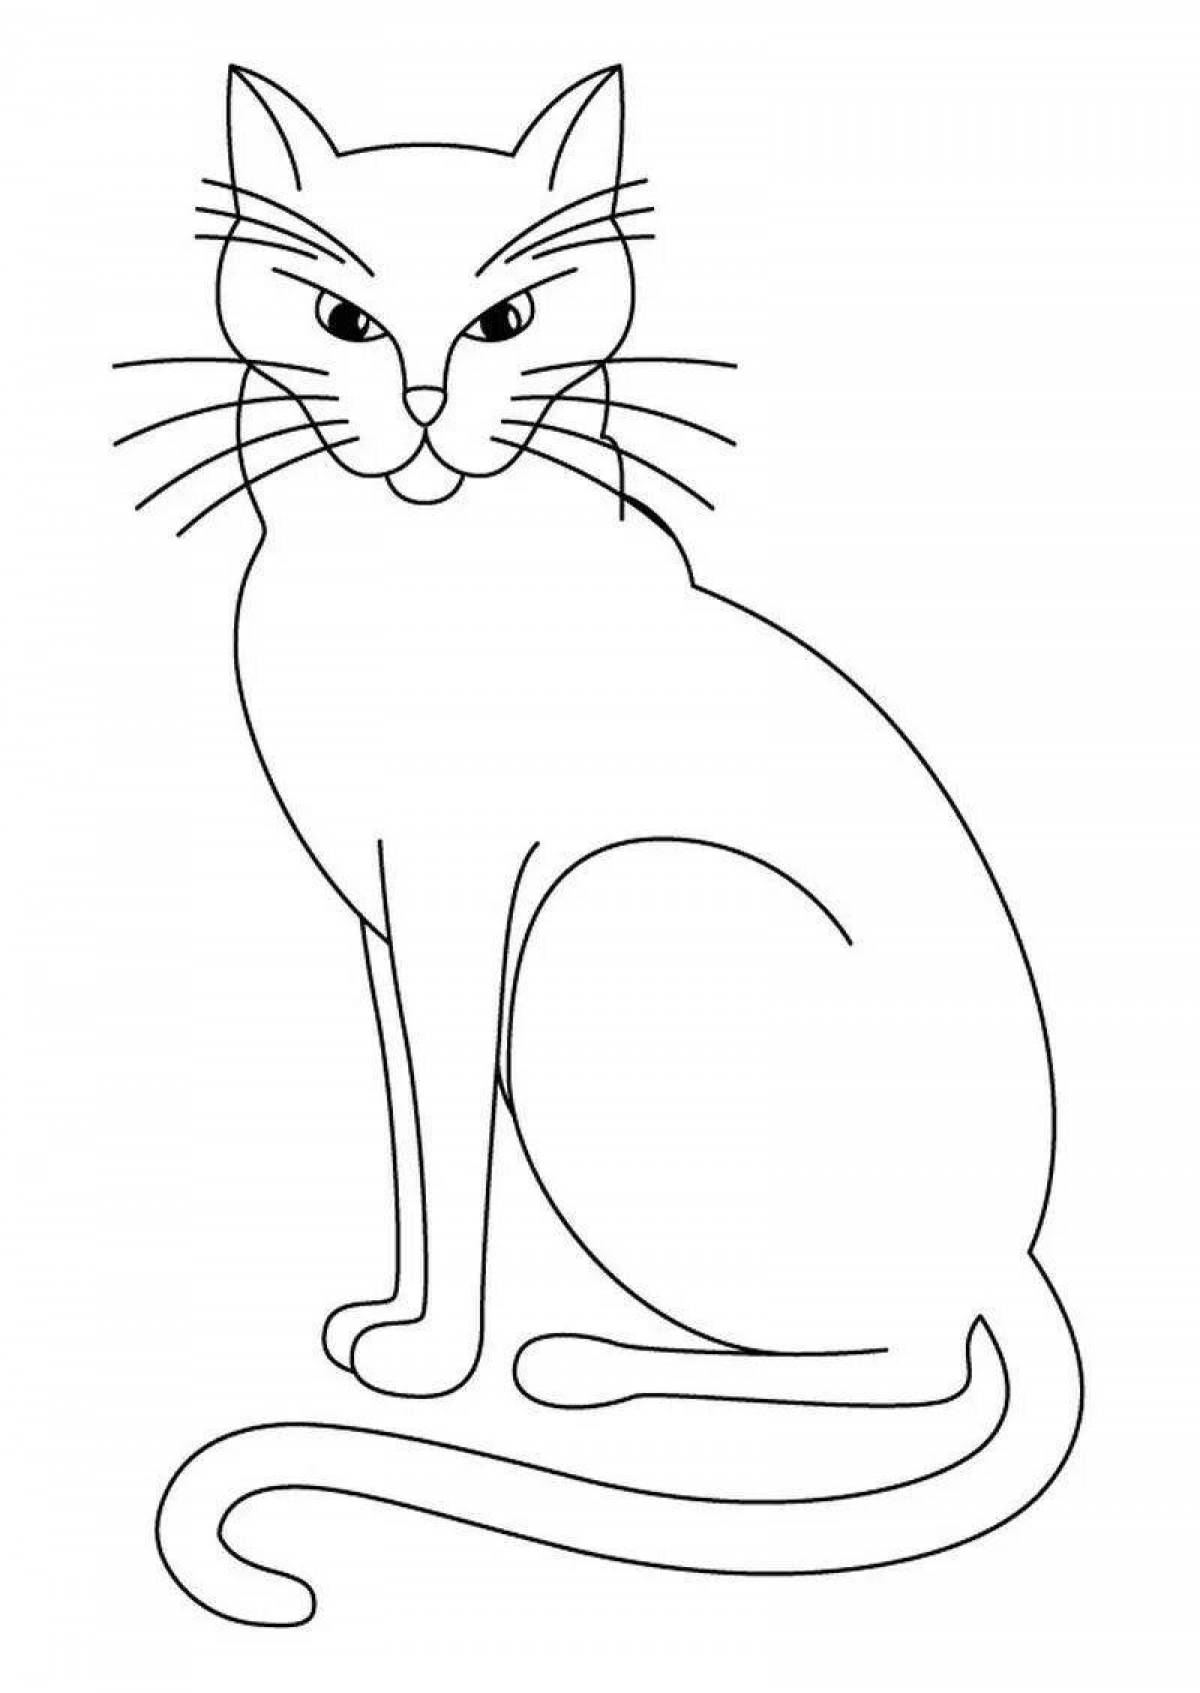 Mysterious black cat coloring book